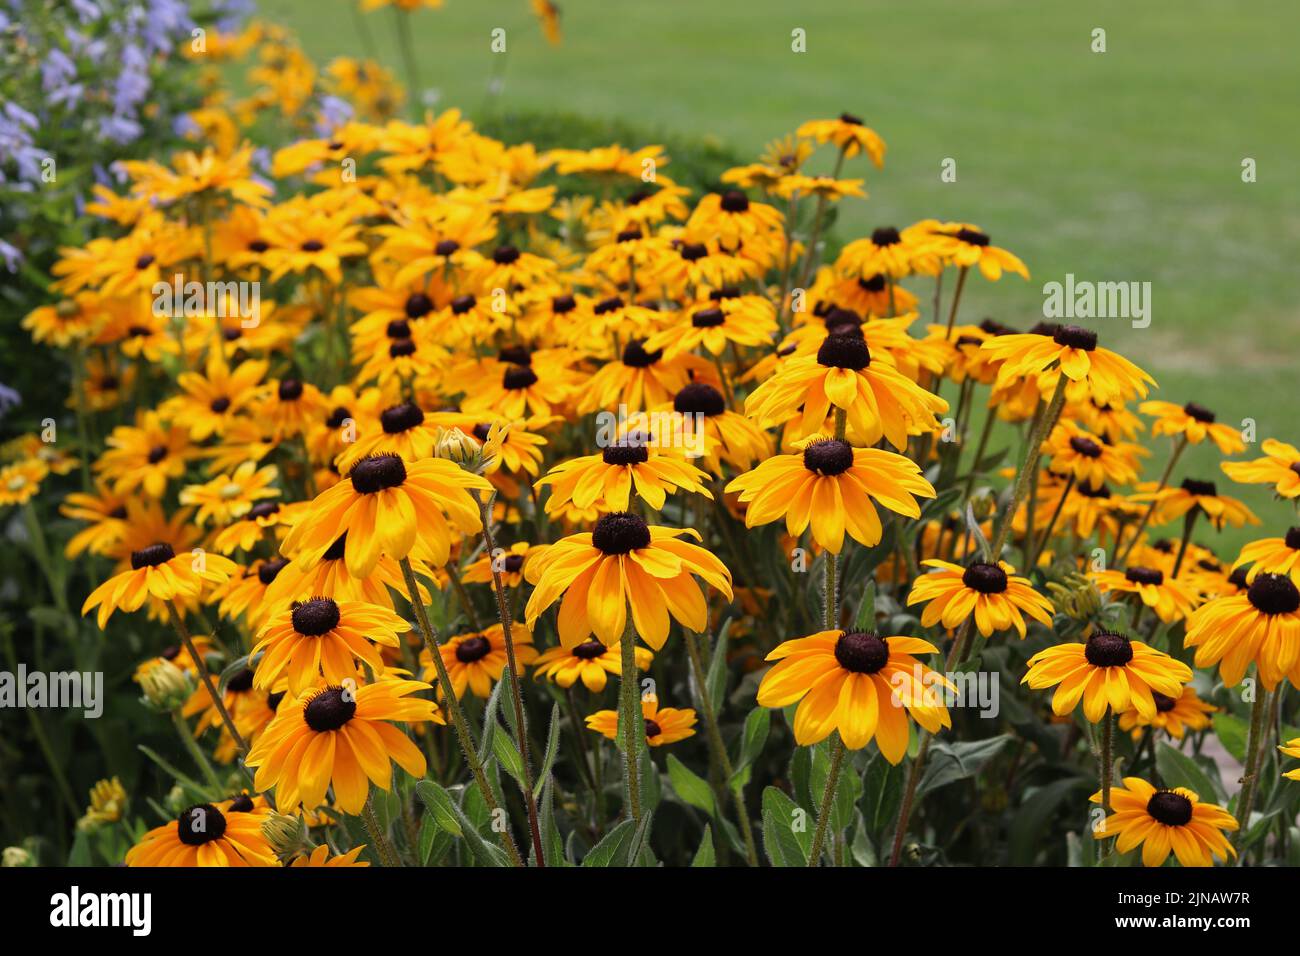 Full frame image of black eyed Susan flowers beside grass lawn Stock Photo